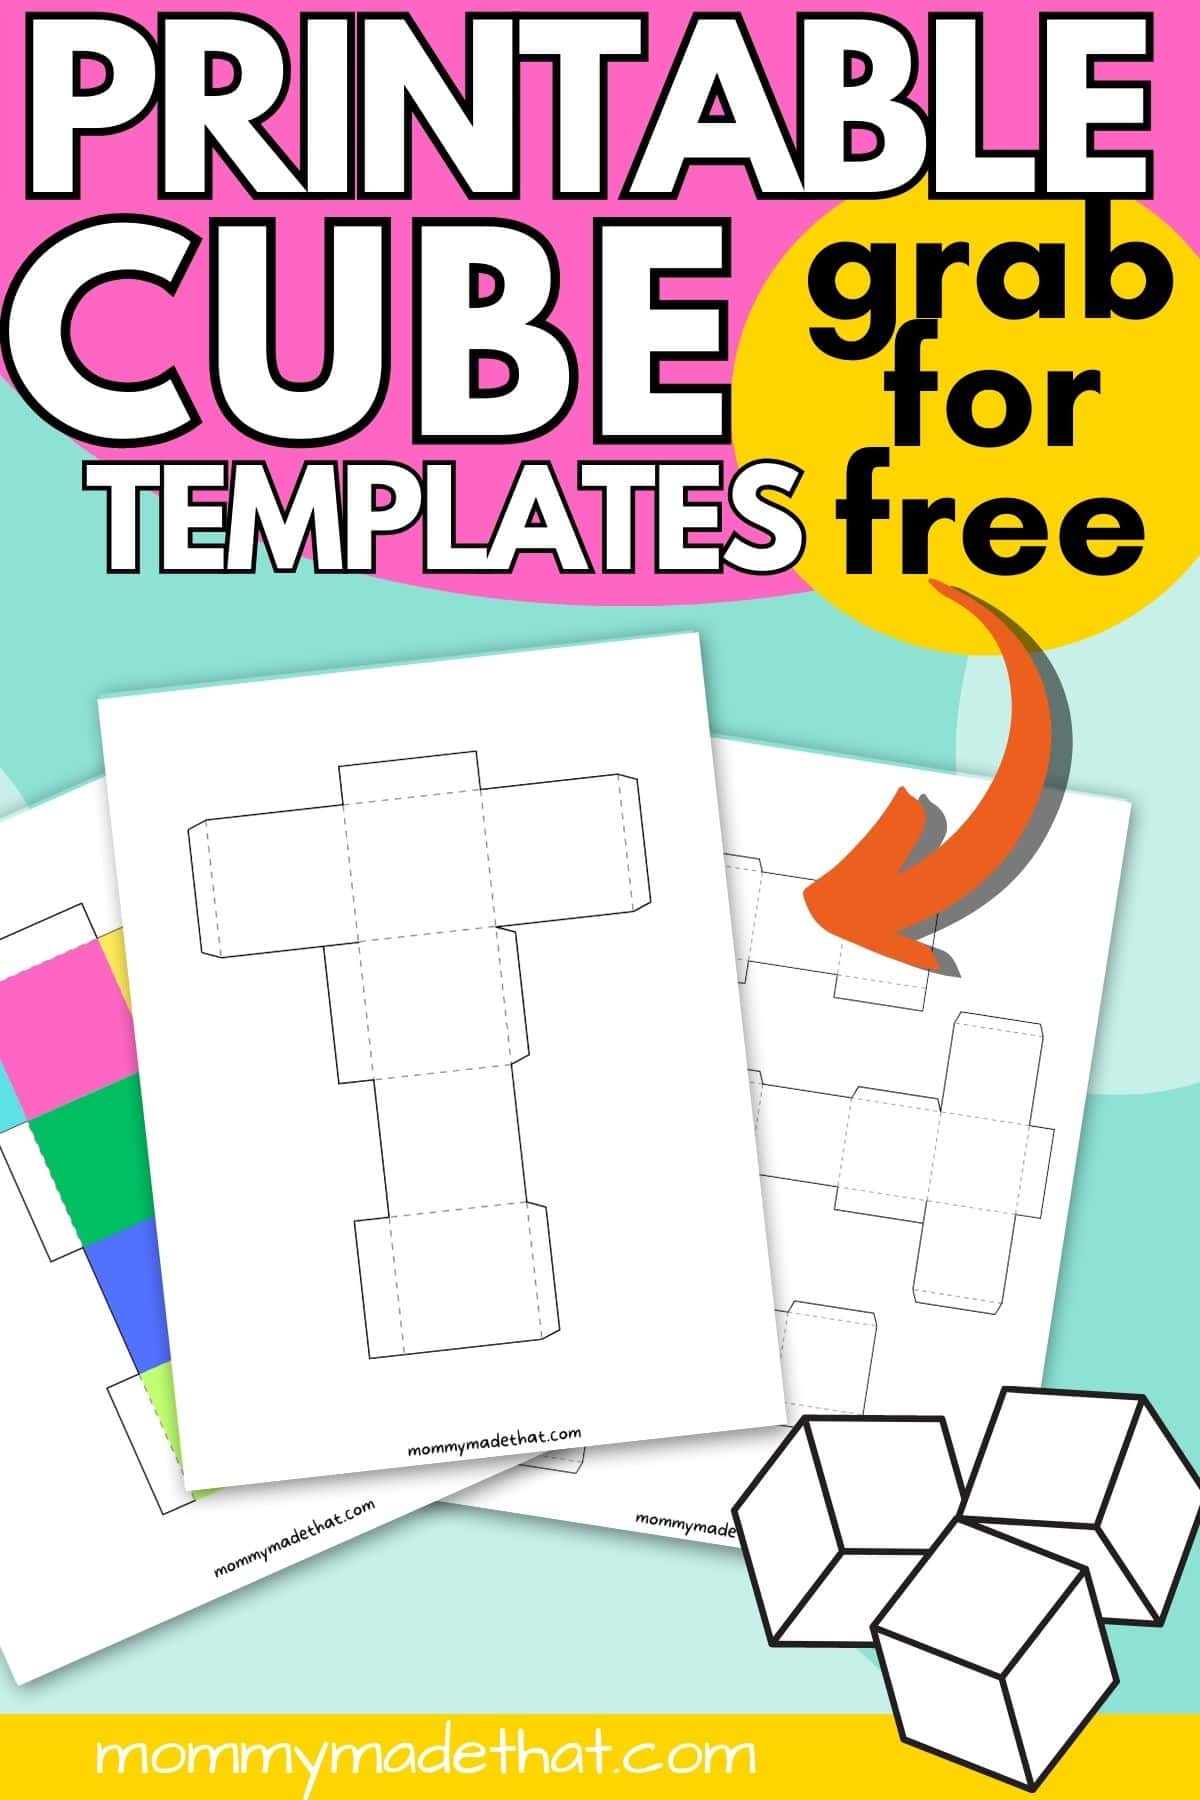 Cube template free printables